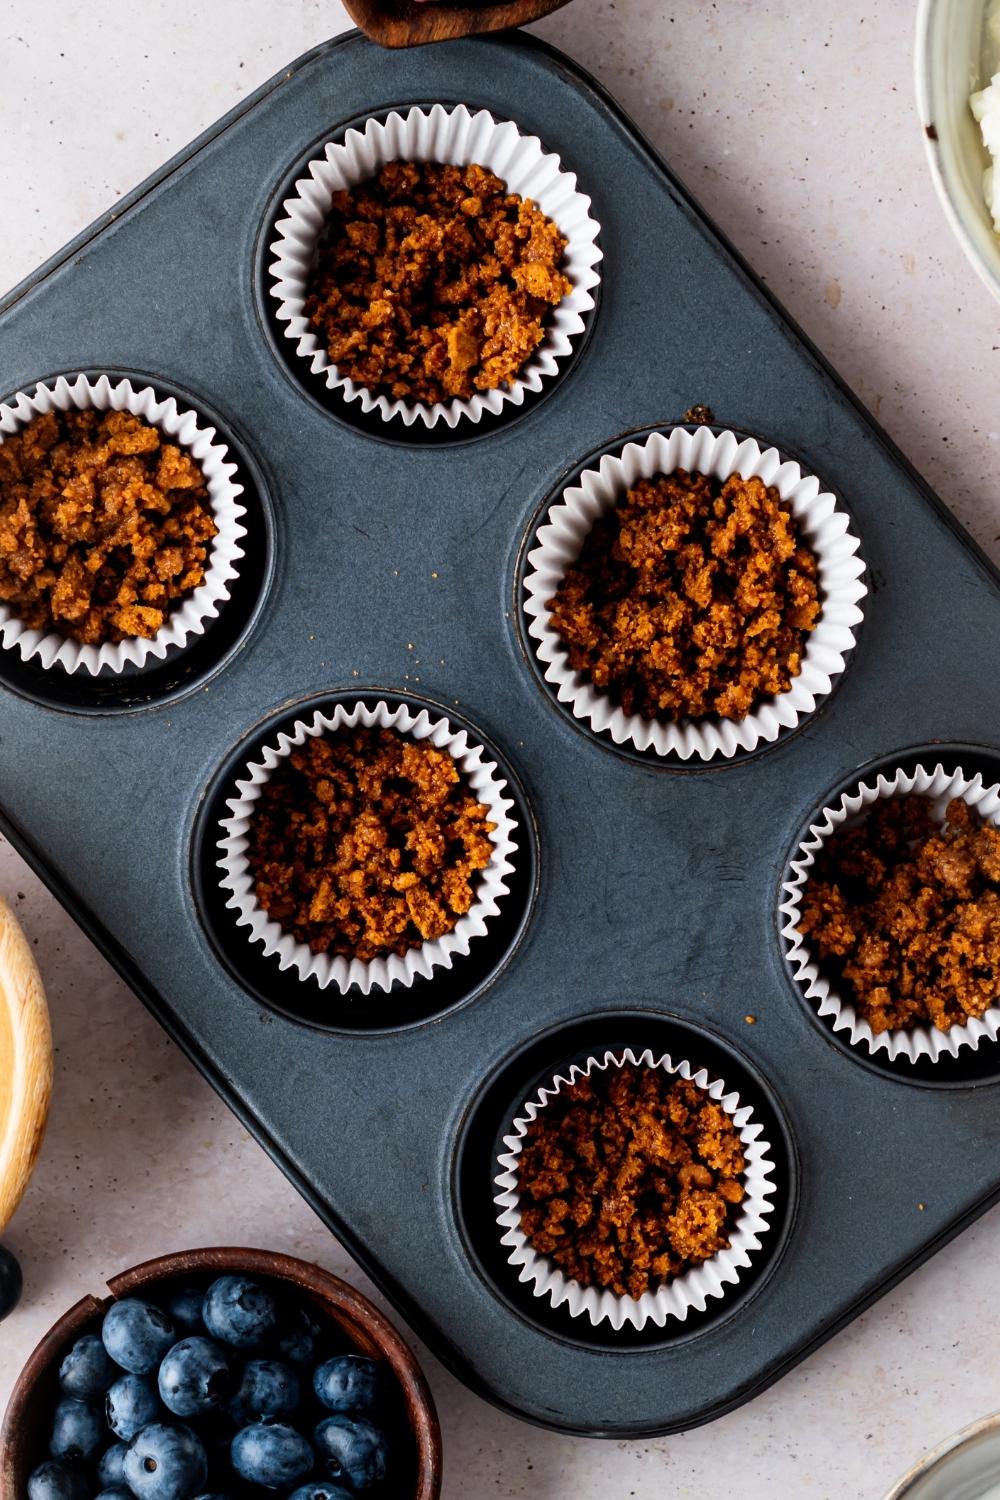 A muffin pan with graham cracker crust scooped in each muffin liner.